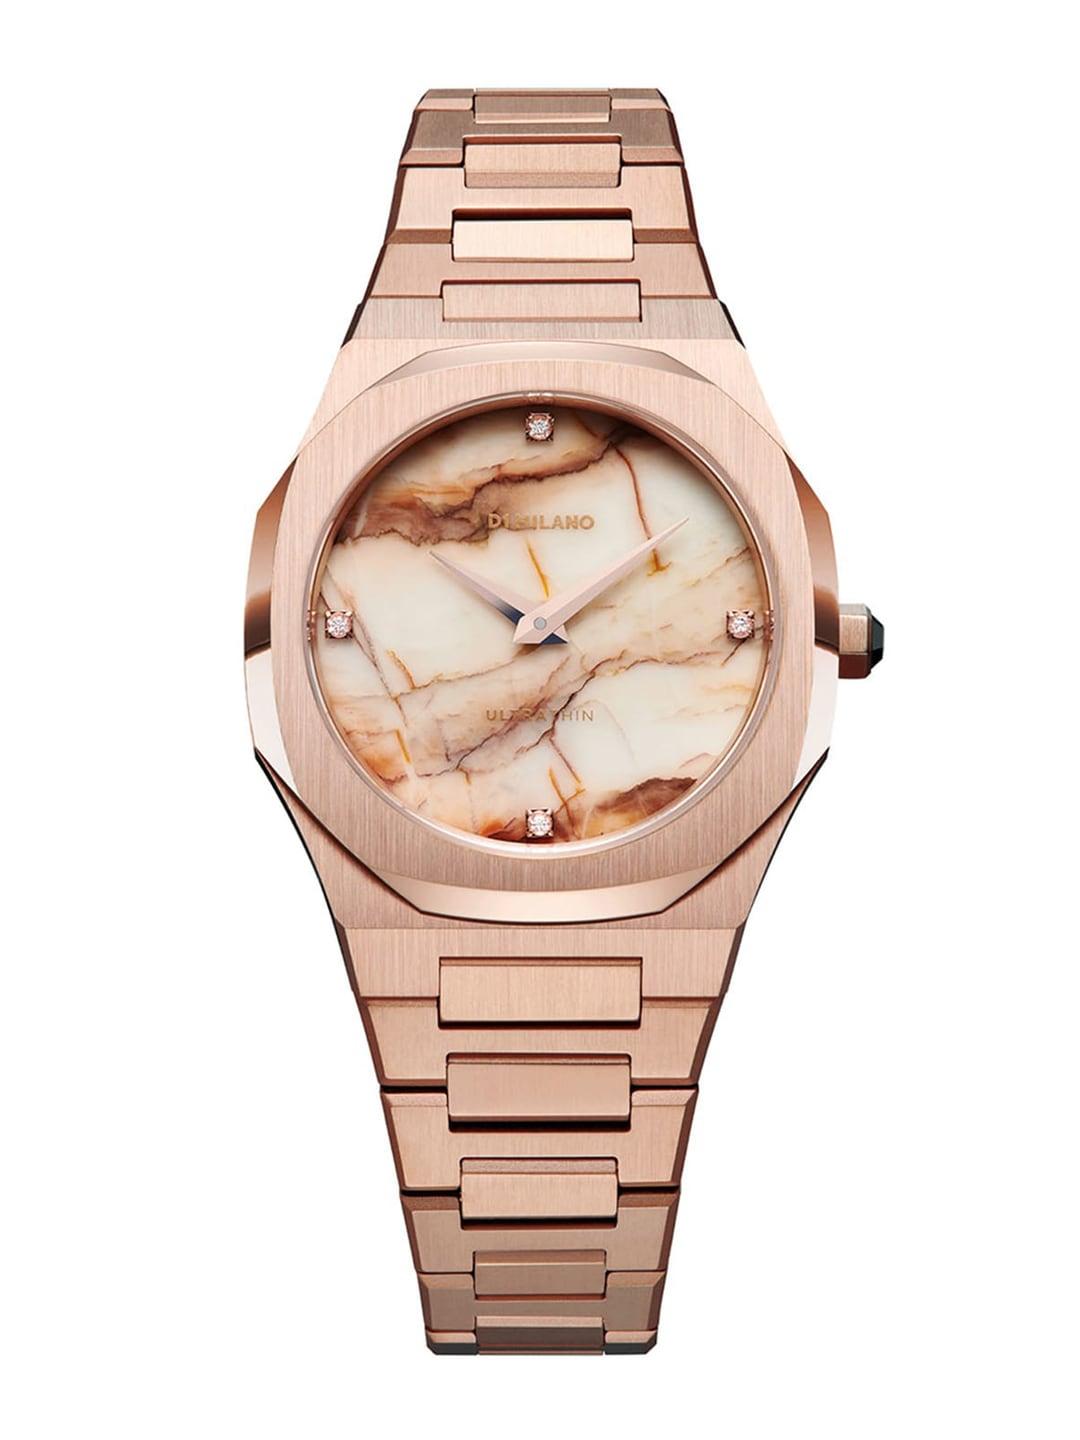 d1 milano women rose gold-toned dial & rose gold-plated strap analogue watch utbl14